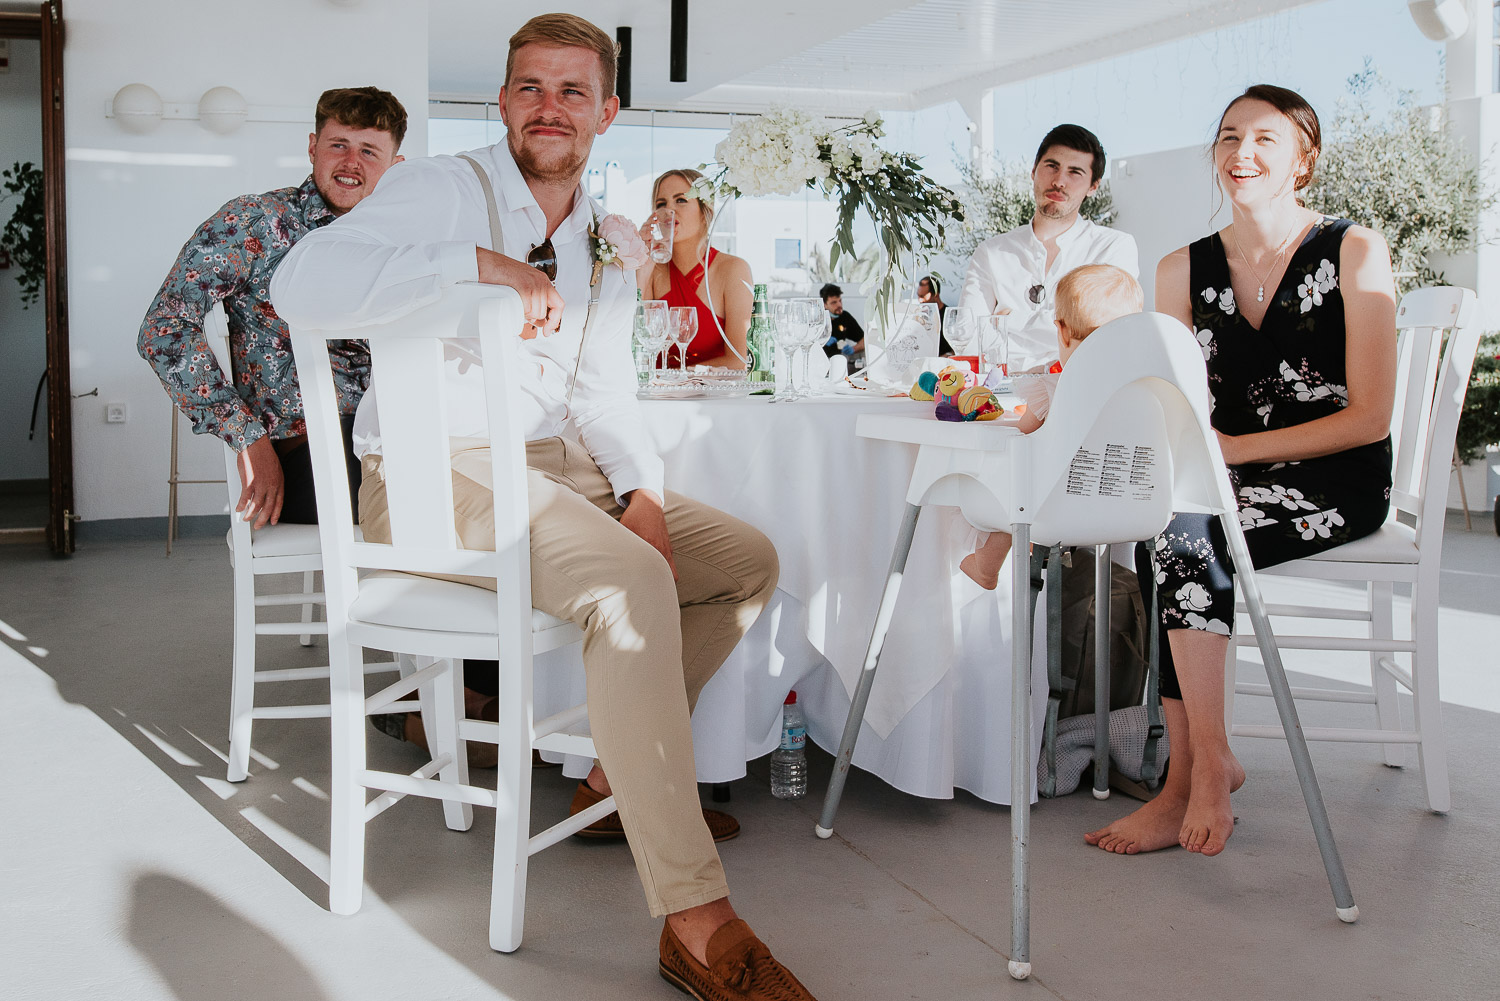 Wedding photographer Santorini: guests sat at their banquet table in the shade smiling as they listen to the speeches by Ben and Vesna.